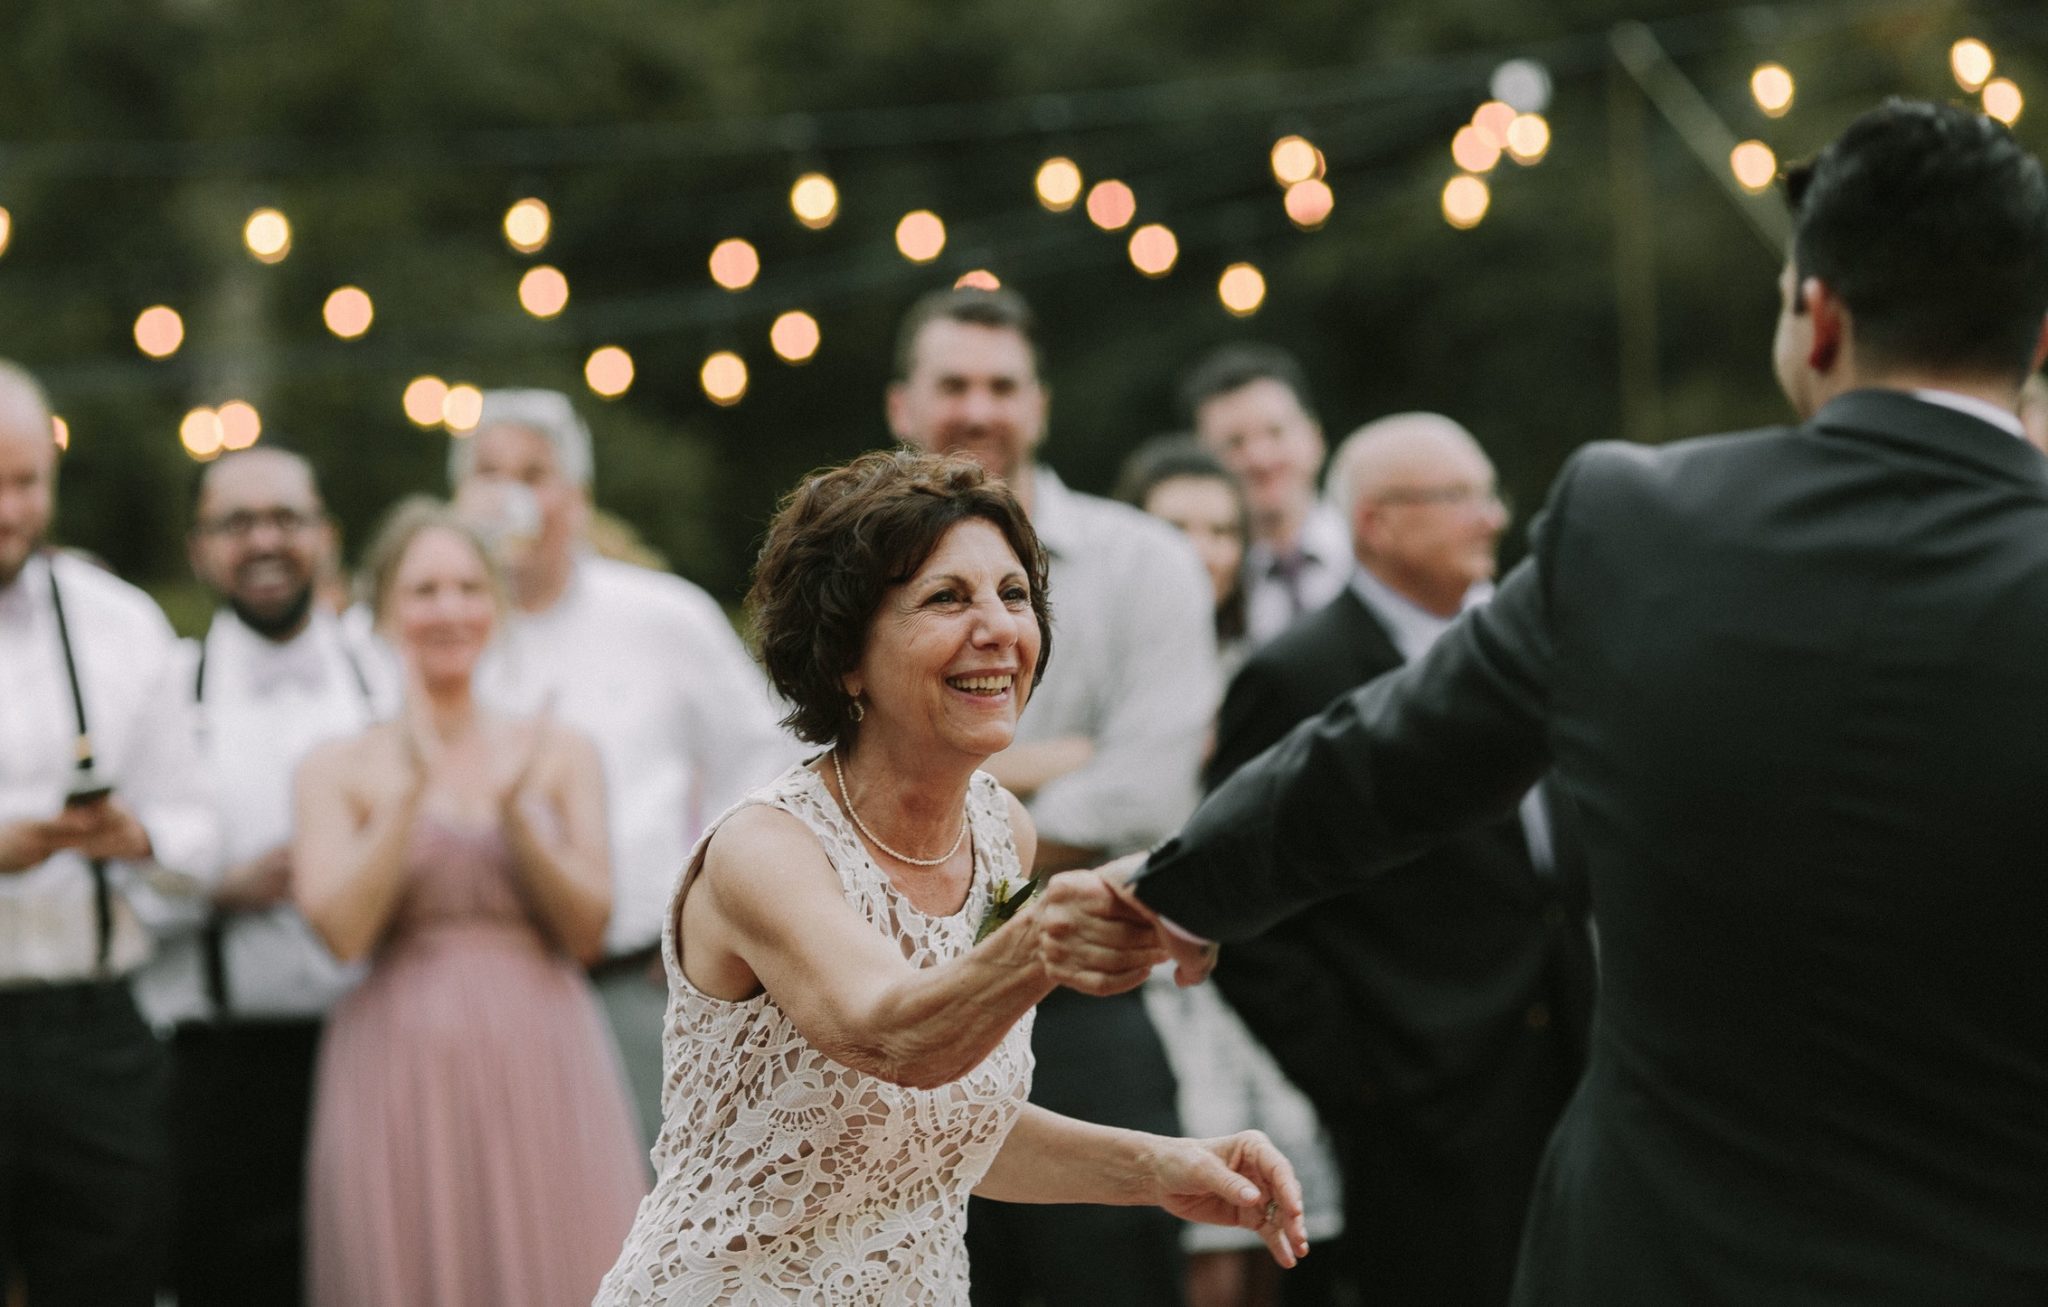 A smiling older woman in a white lace dress reaches out to a man on a dance floor lit by edison bulbs as guests look on in a photo by Betty Clicker